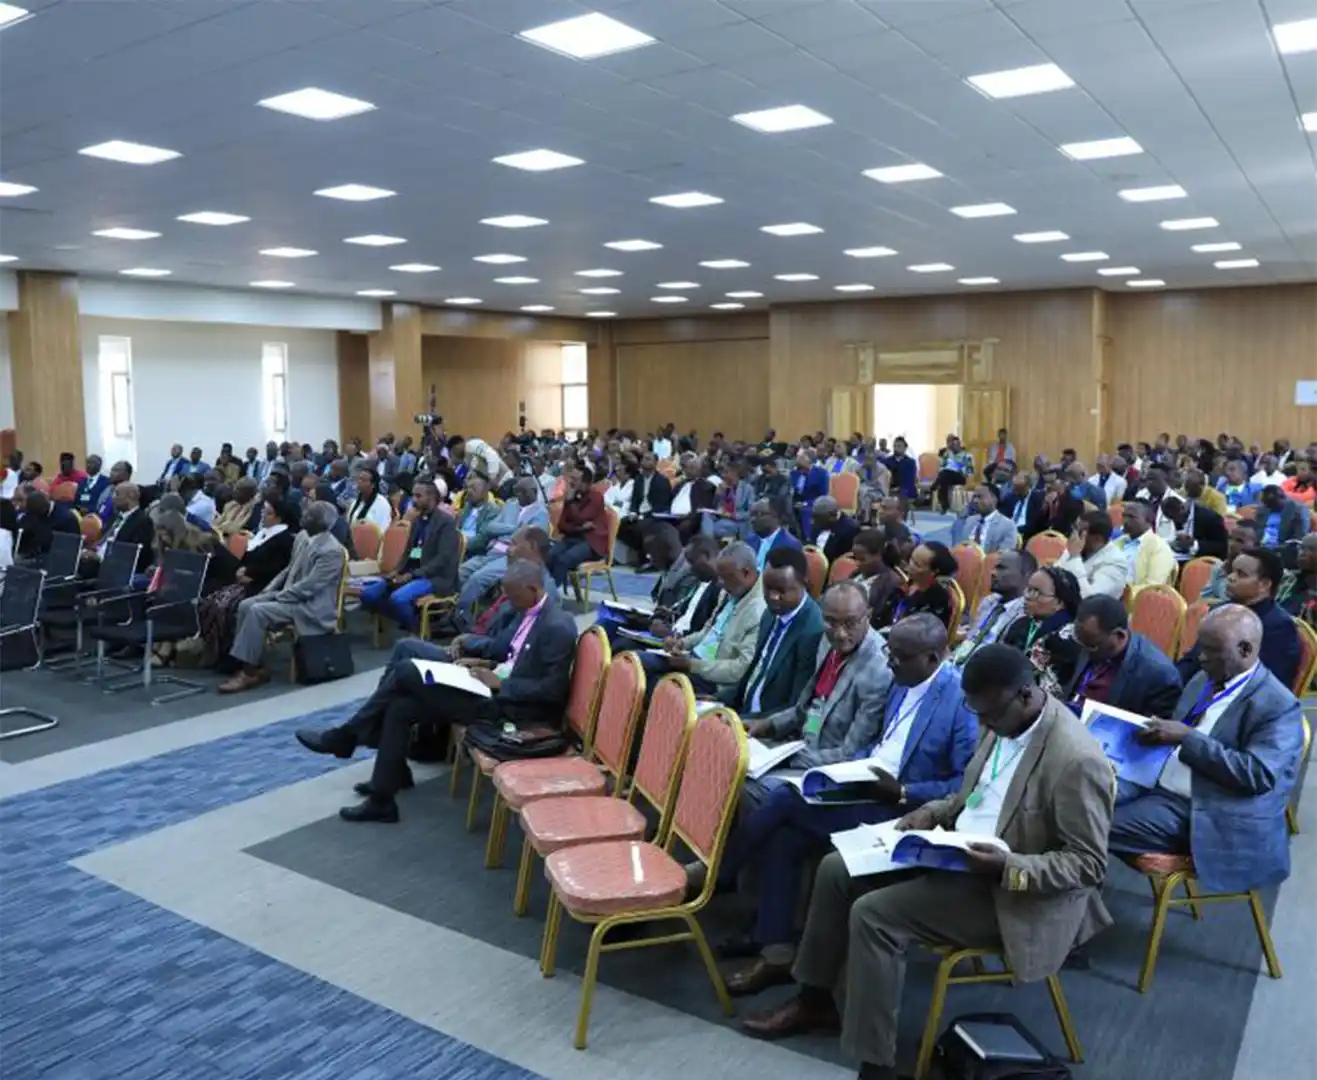 19th-council-meeting-of-the-ethiopia-evangelical-church